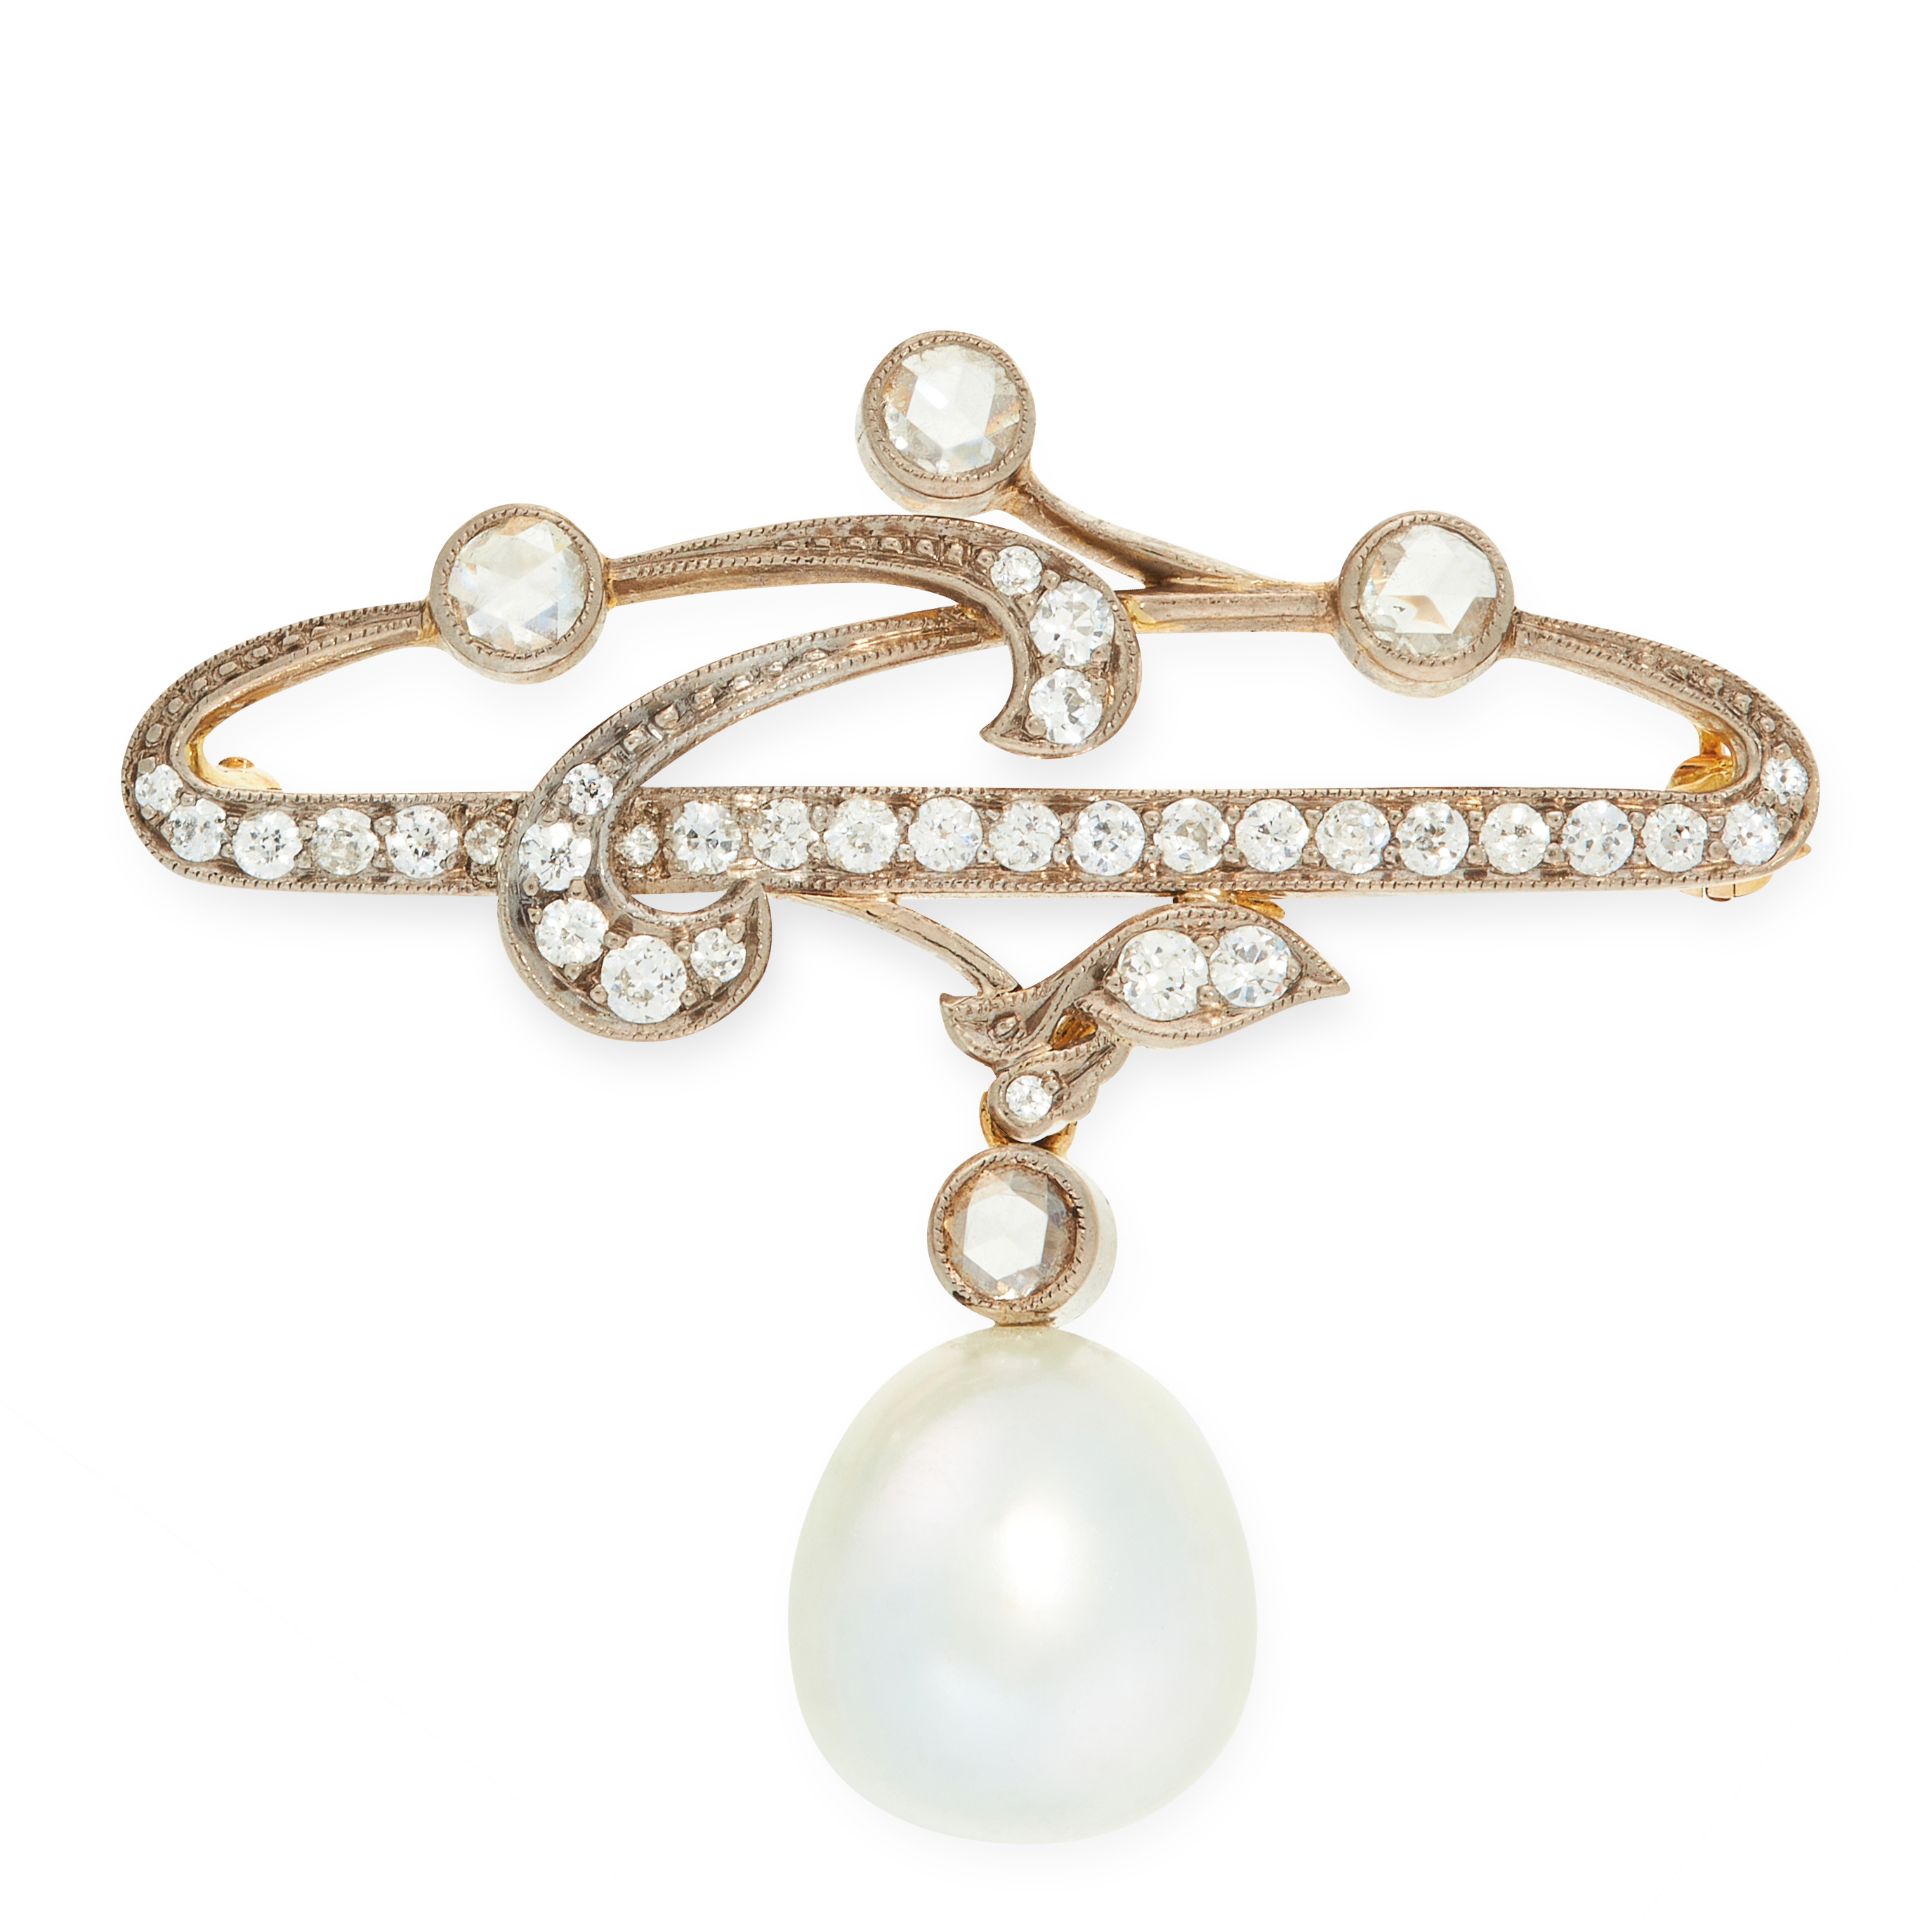 A PEARL AND DIAMOND BROOCH in 18ct yellow and white gold, the Art Nouveau design set with old cut